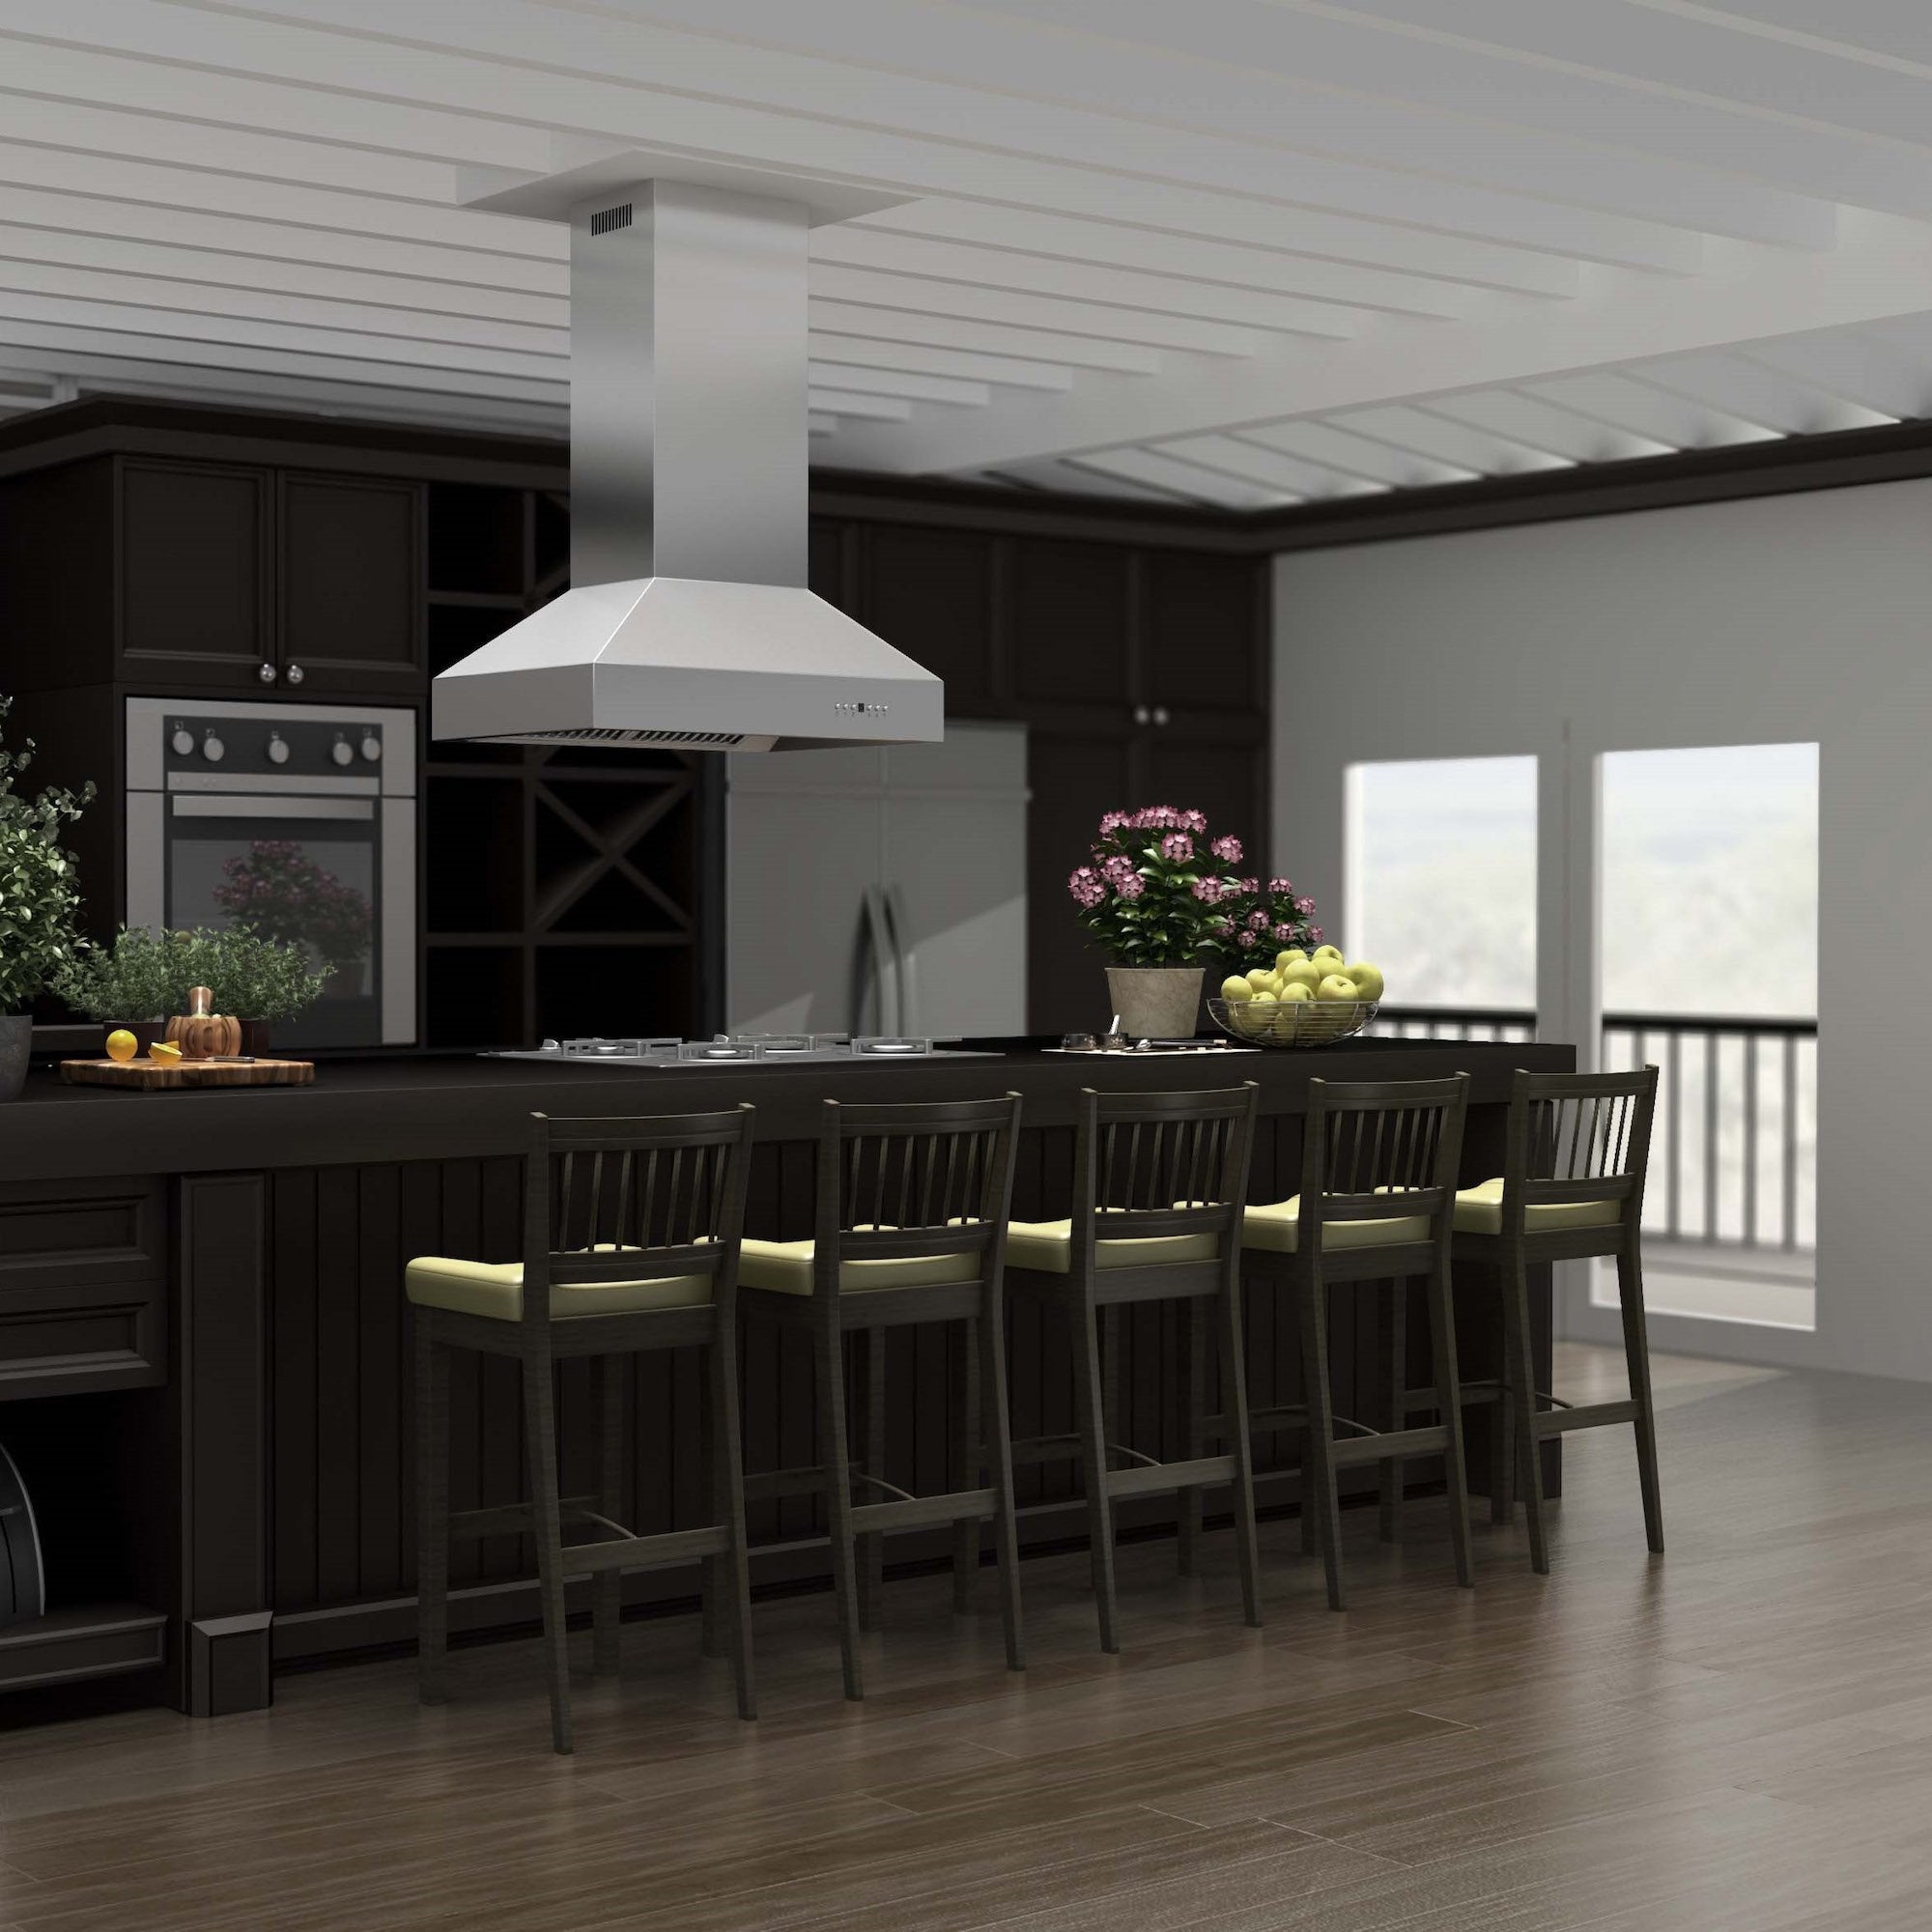 ZLINE Outdoor Approved Island Mount Range Hood in Stainless Steel (697i-304) rendering in a rustic kitchen wide.